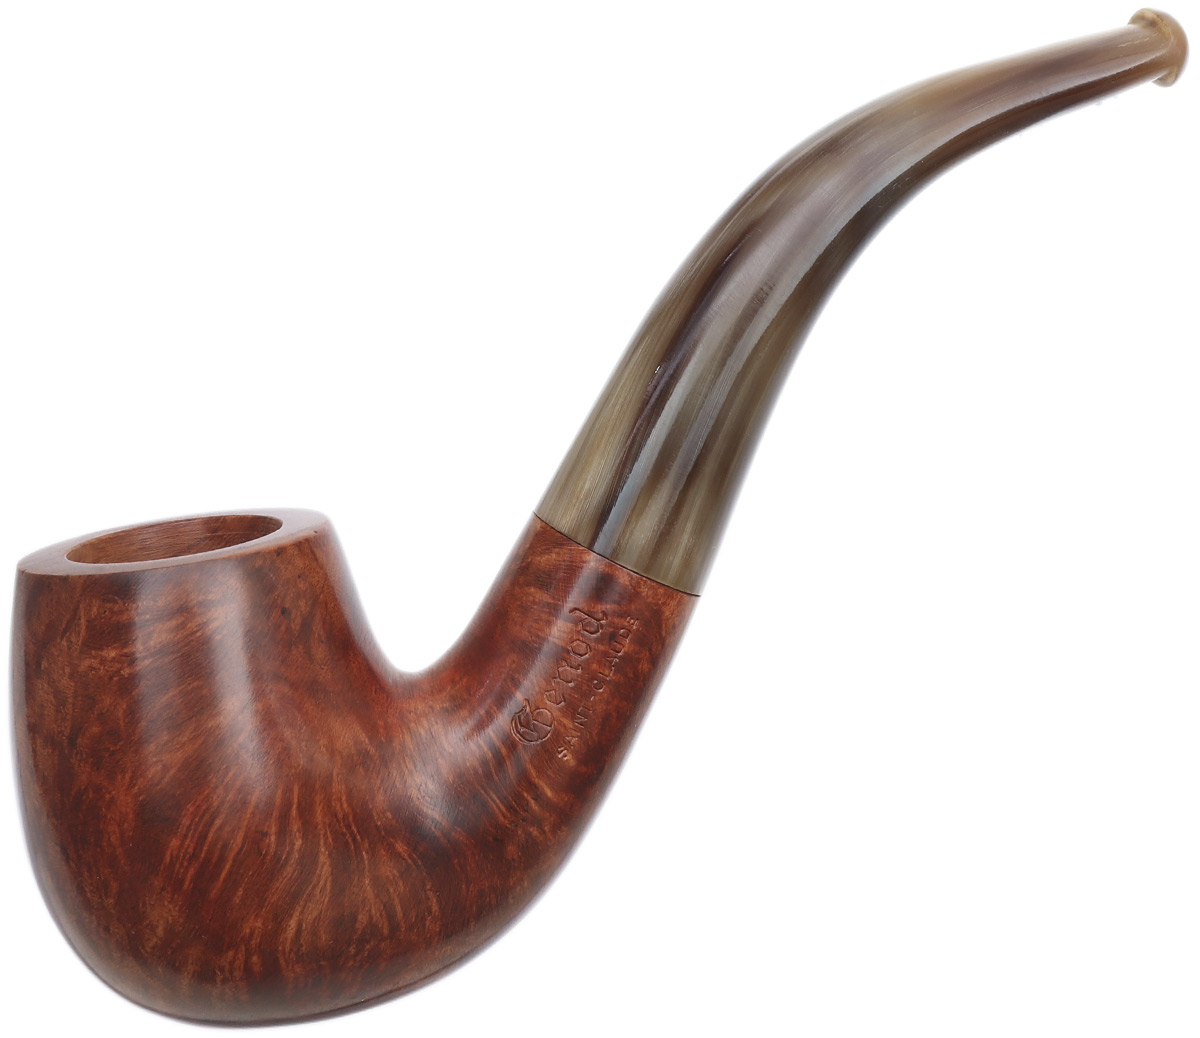 Genod Smooth Bright Bent Billiard with Horn (9mm)